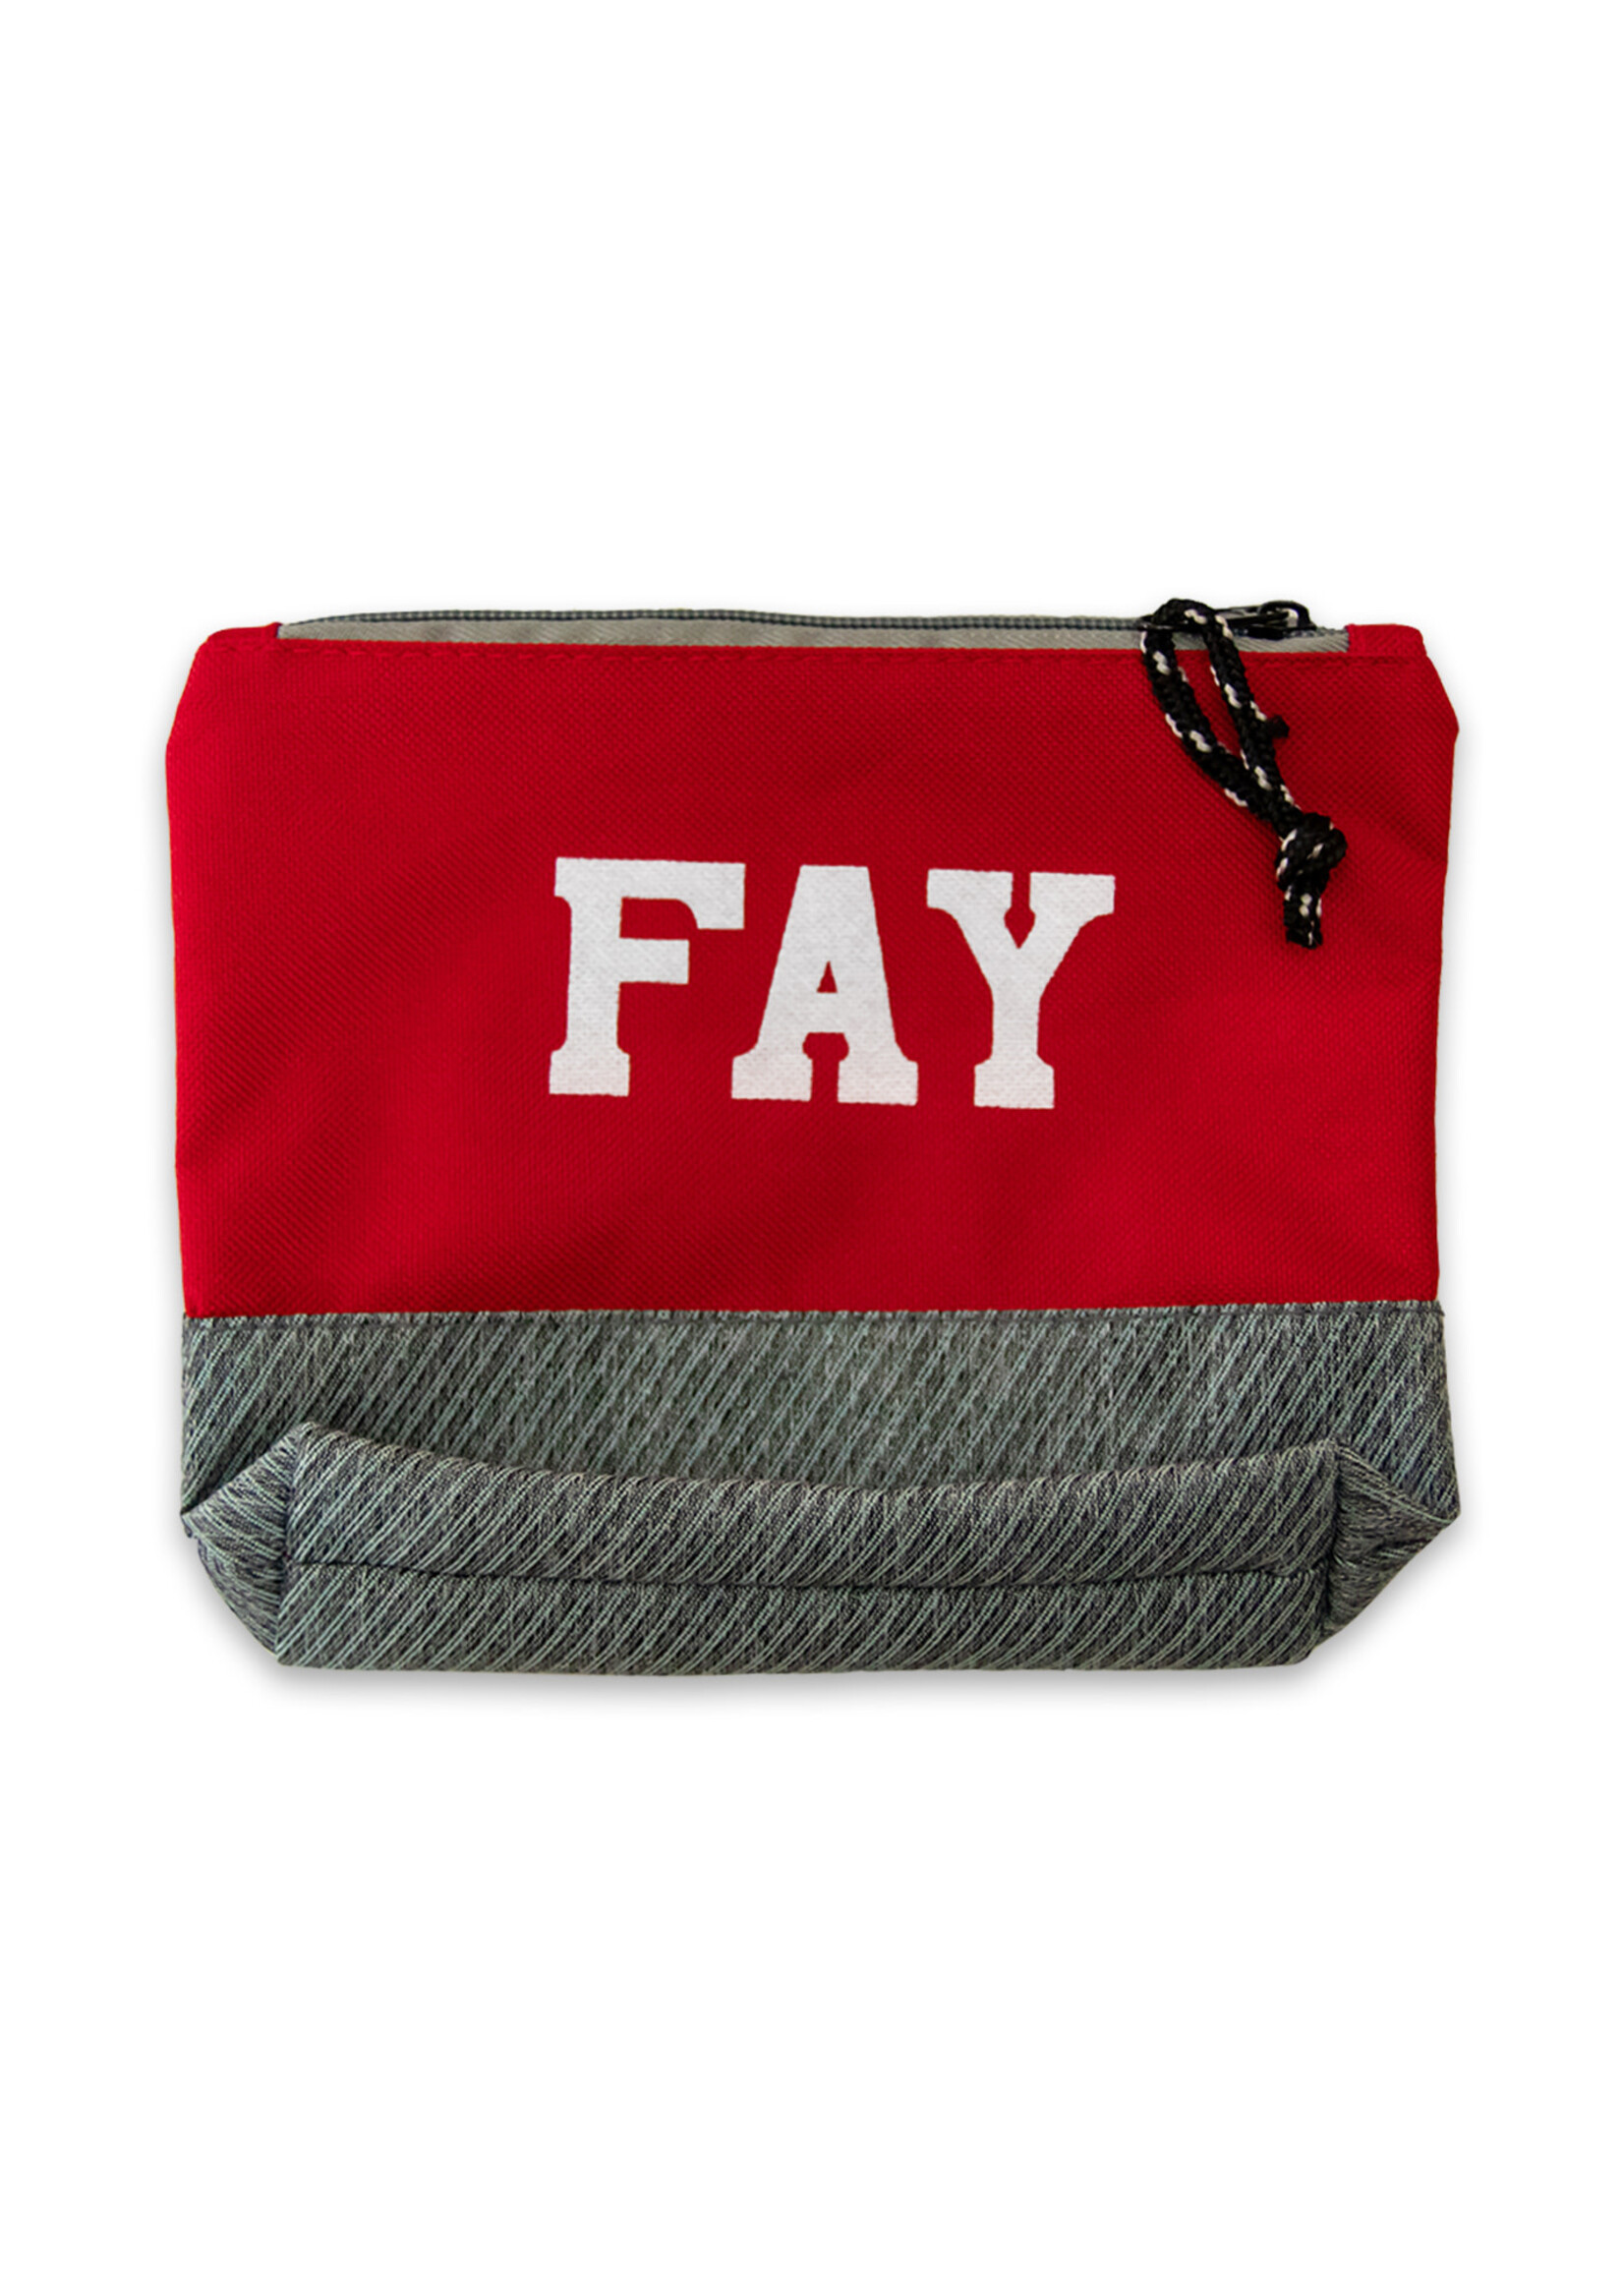 4Imprint Travel Pouch Bag FAY Red/Gray